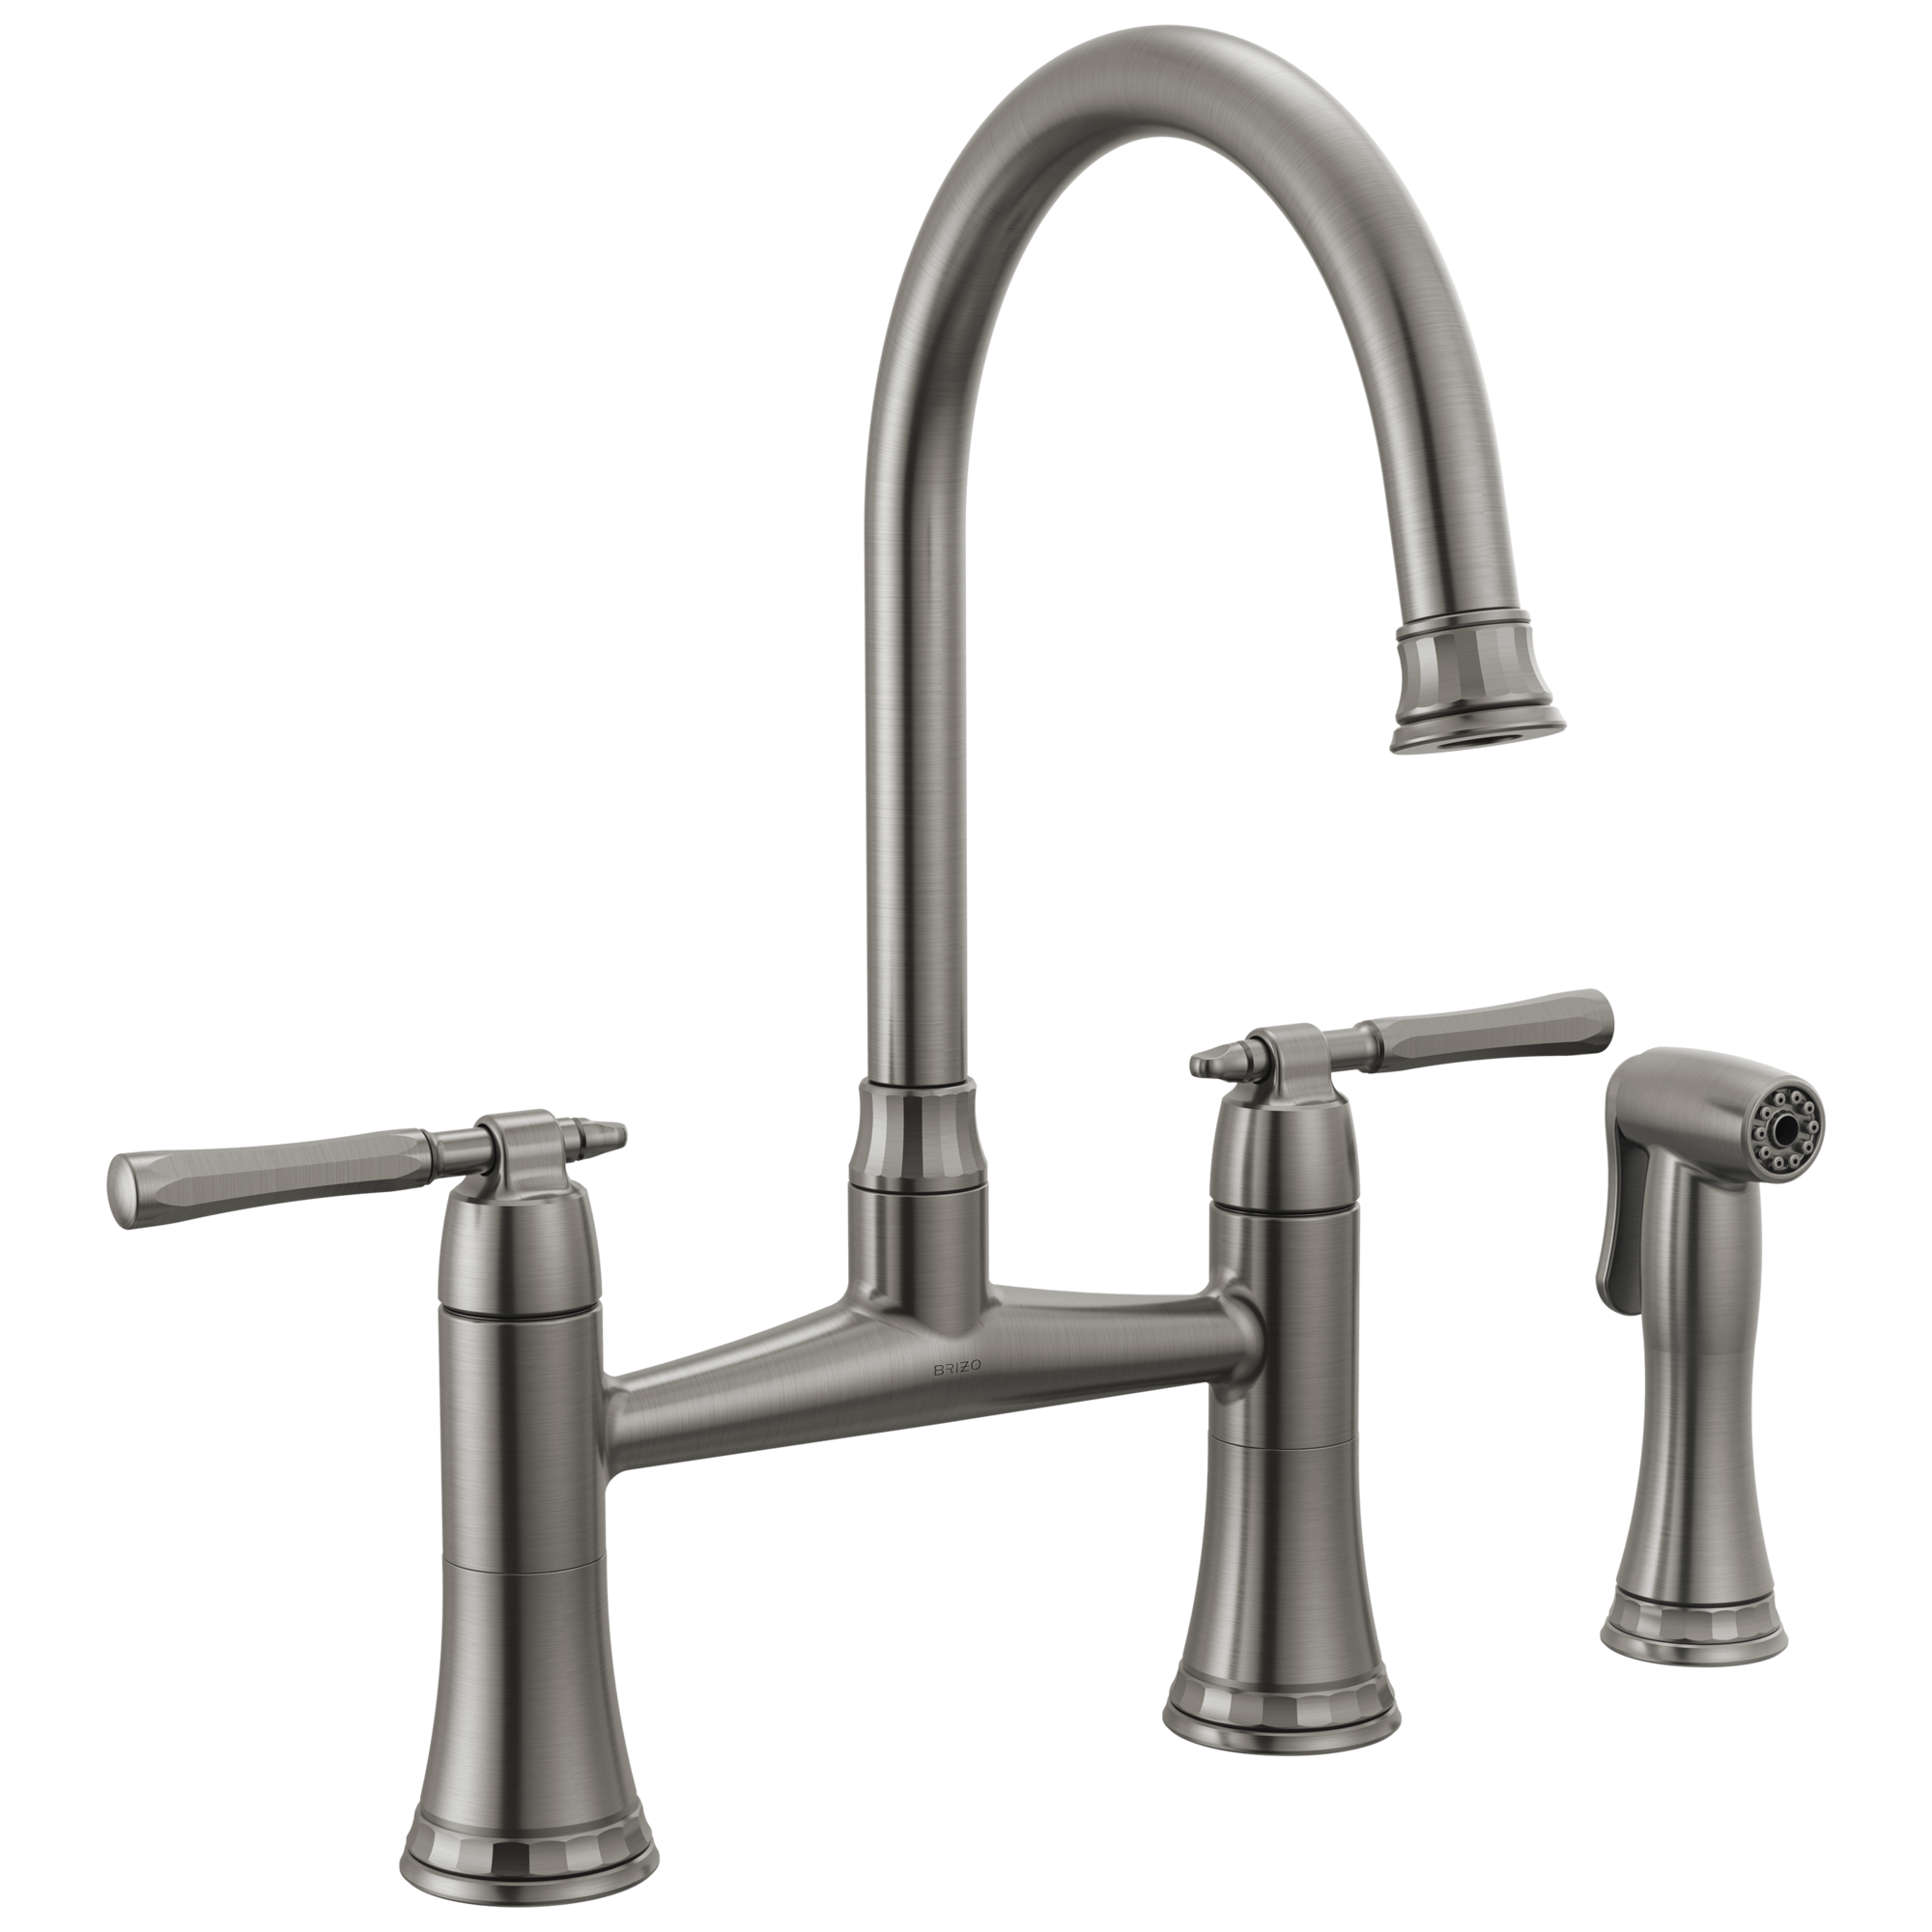 Brizo The Tulham Kitchen Collection by Brizo Bridge Kitchen Faucet with Side Spray